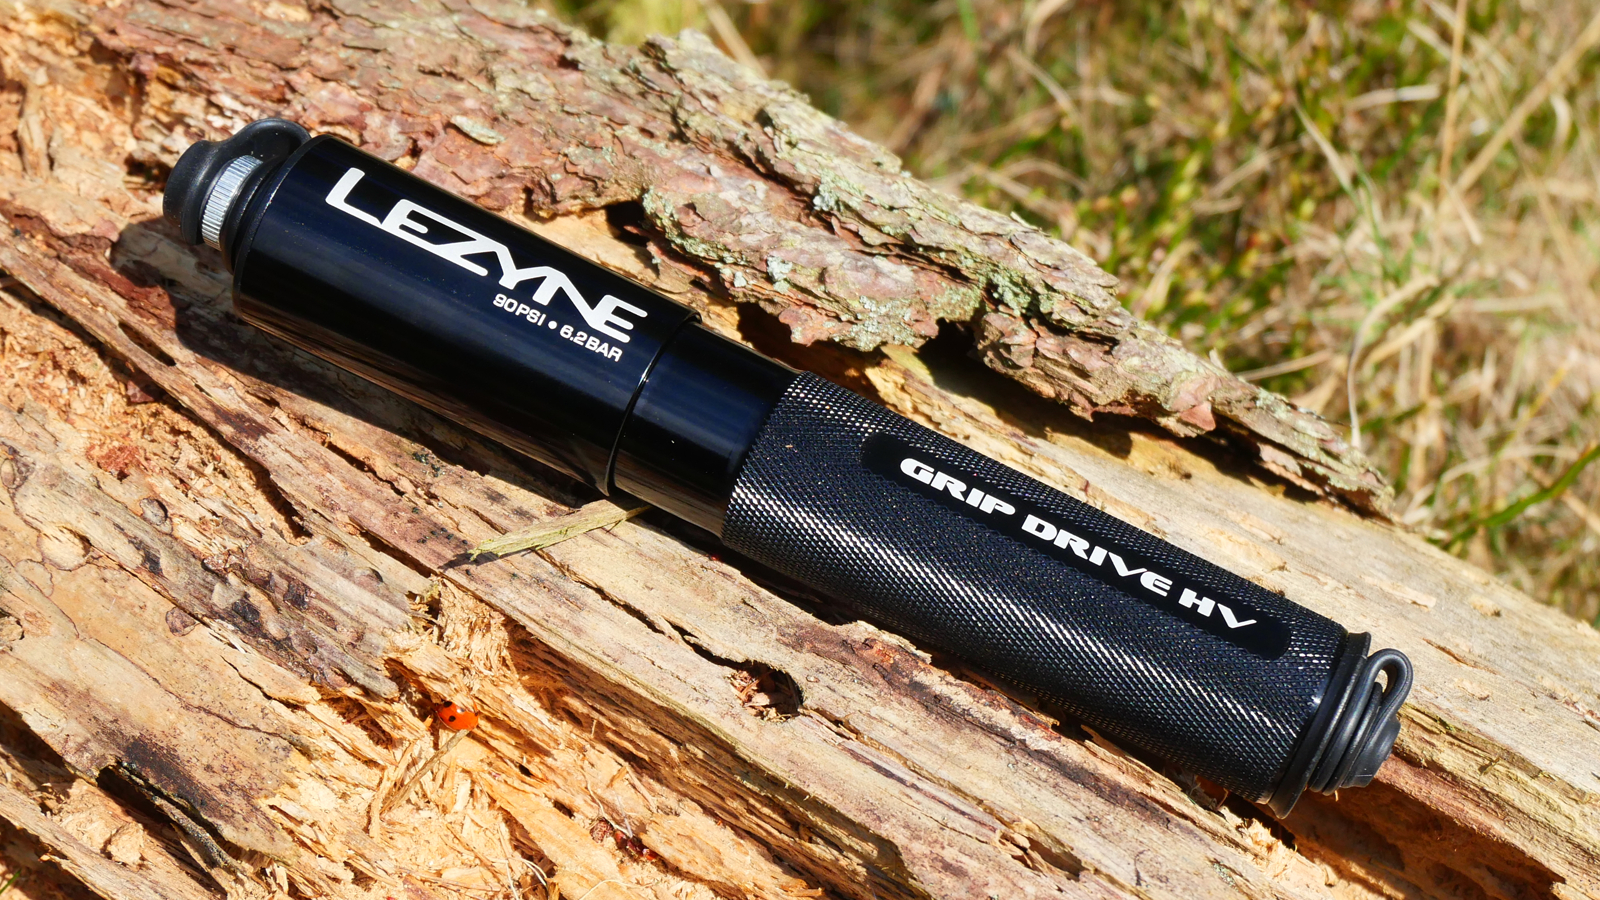 Lezyne Grip Drive HV pump review – premium-feeling high-volume pump without the price tag